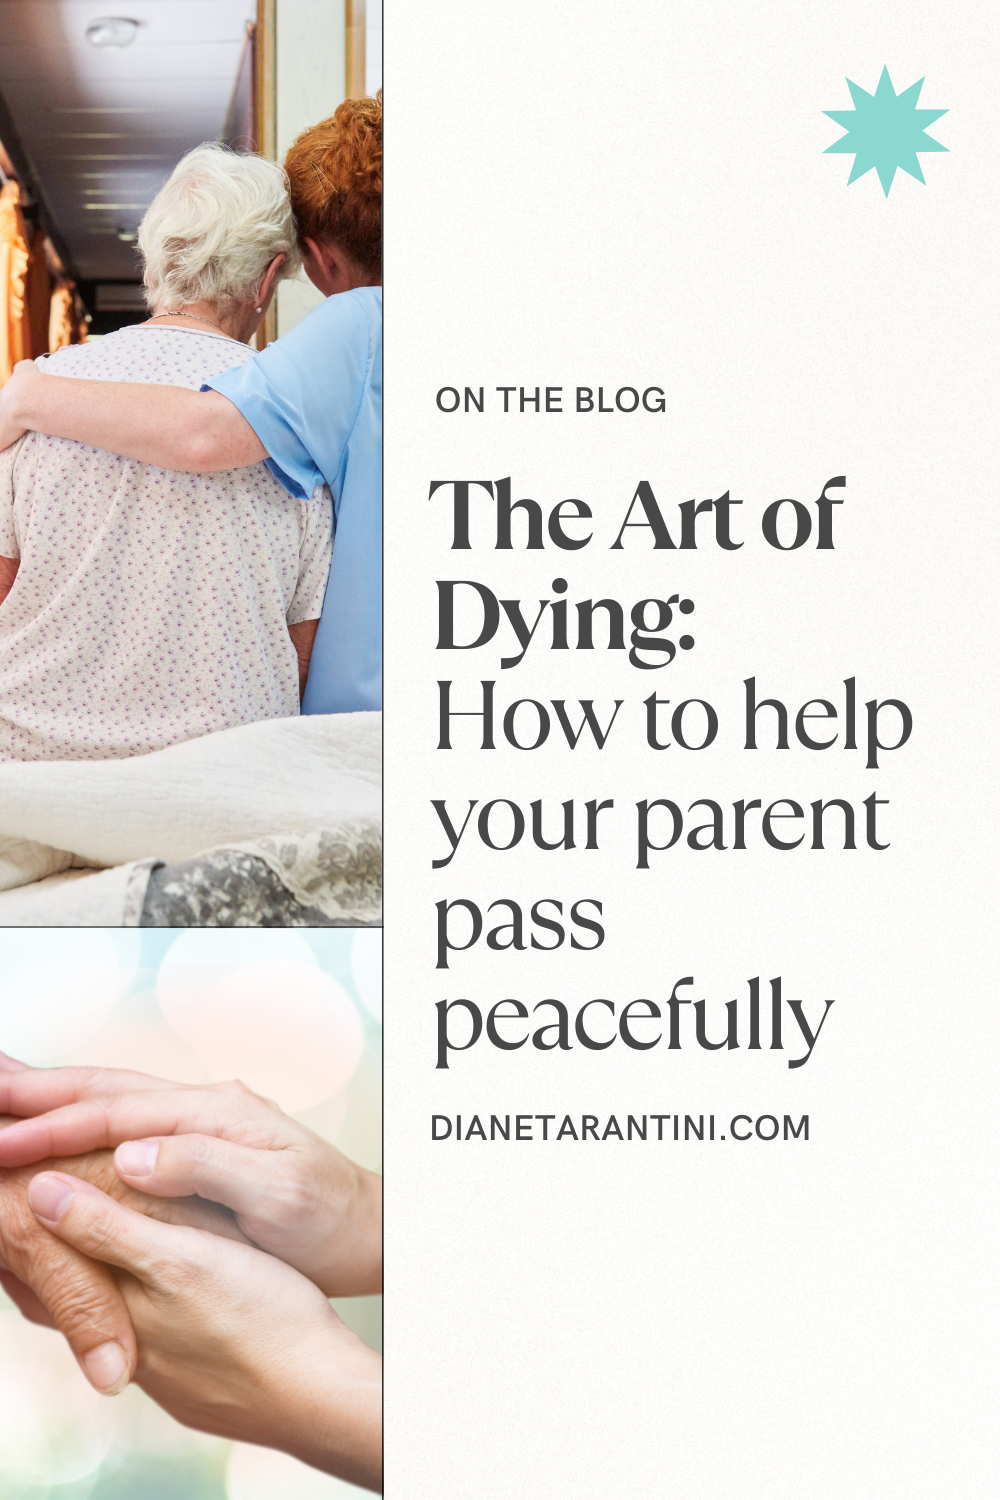 How to care for a dying parent. When your elderly parent is dying